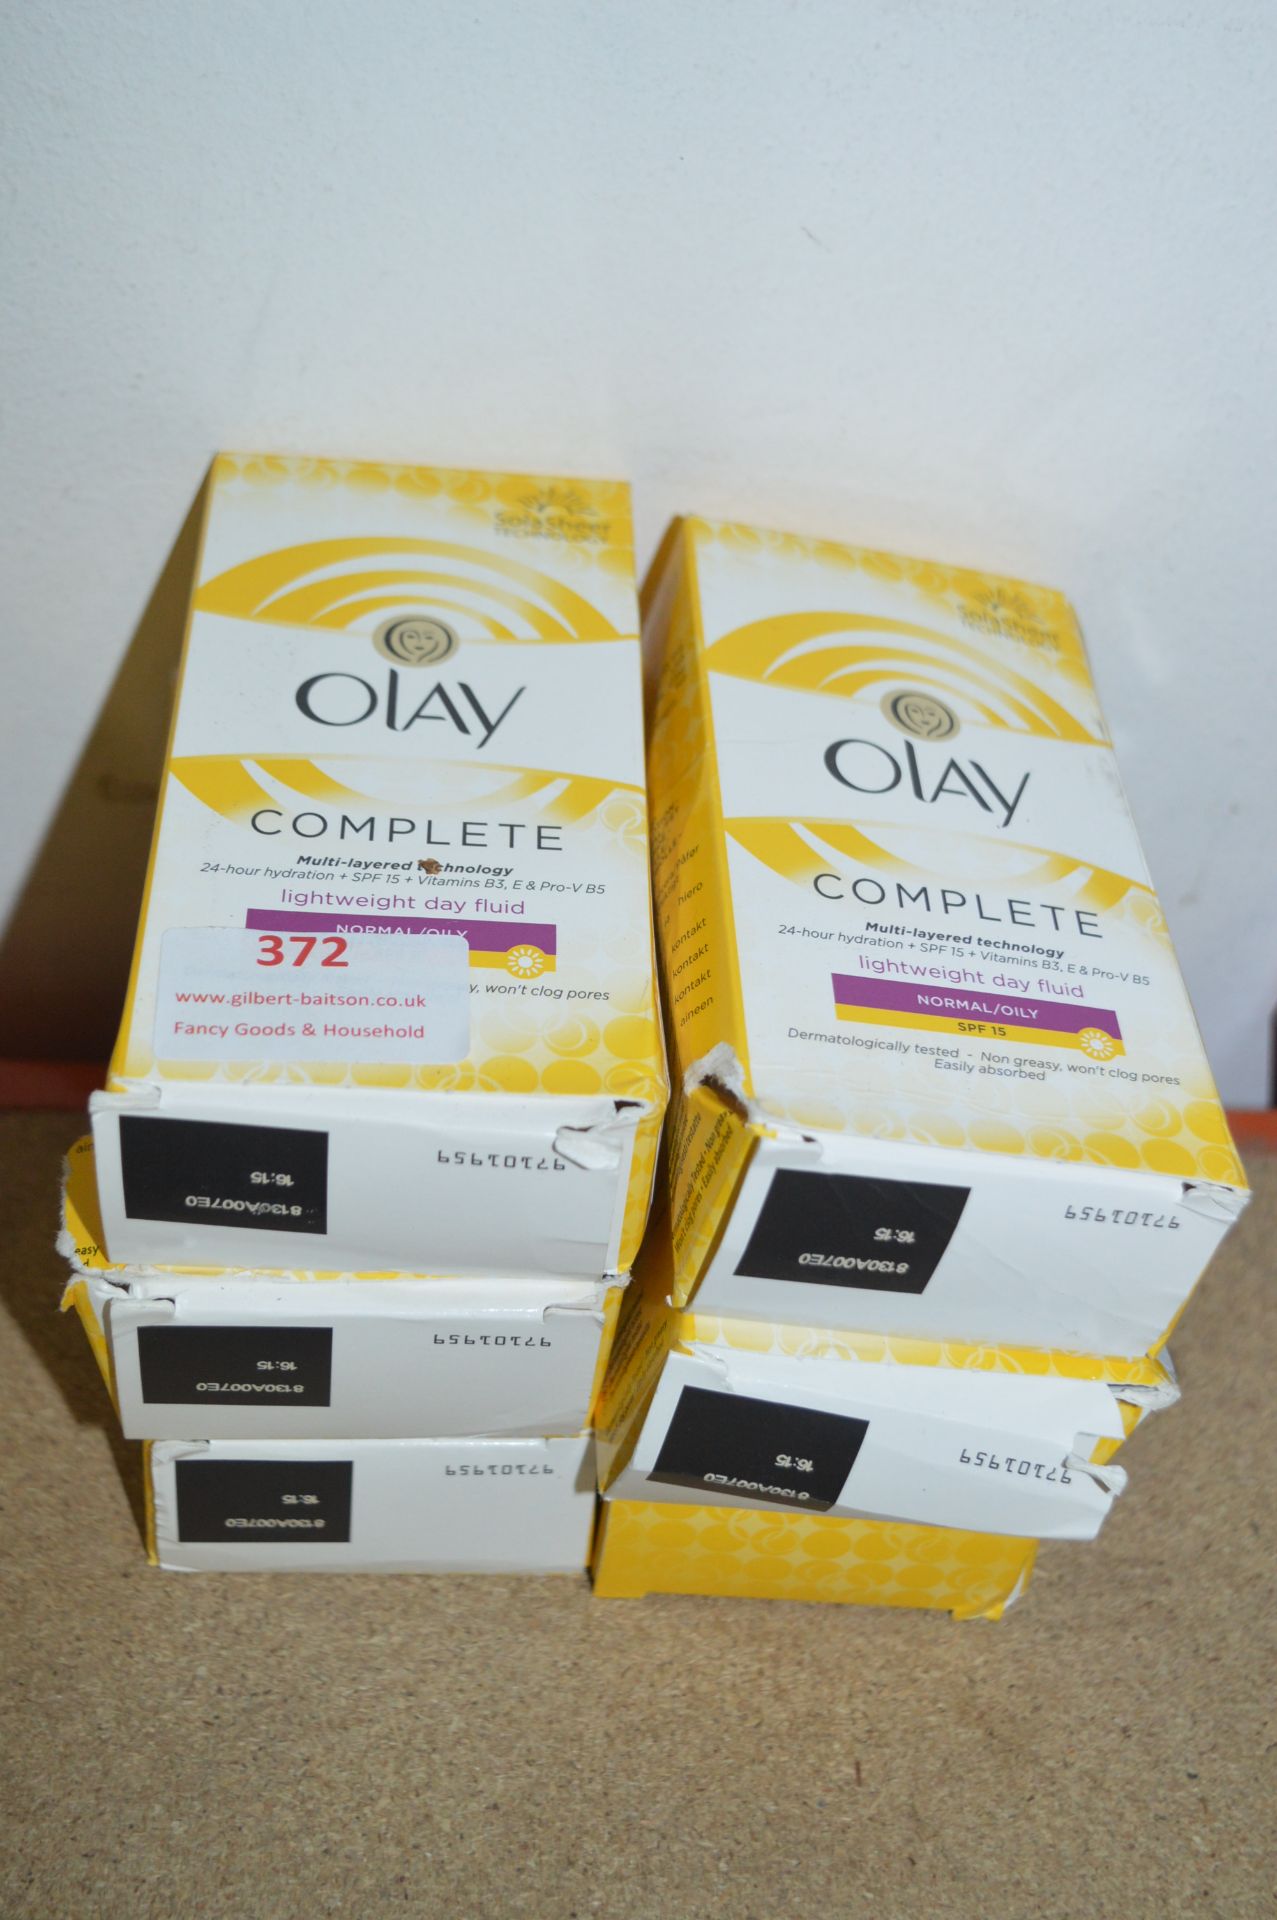 *Six Packs of Olay Complete Lightweight Day Fluid